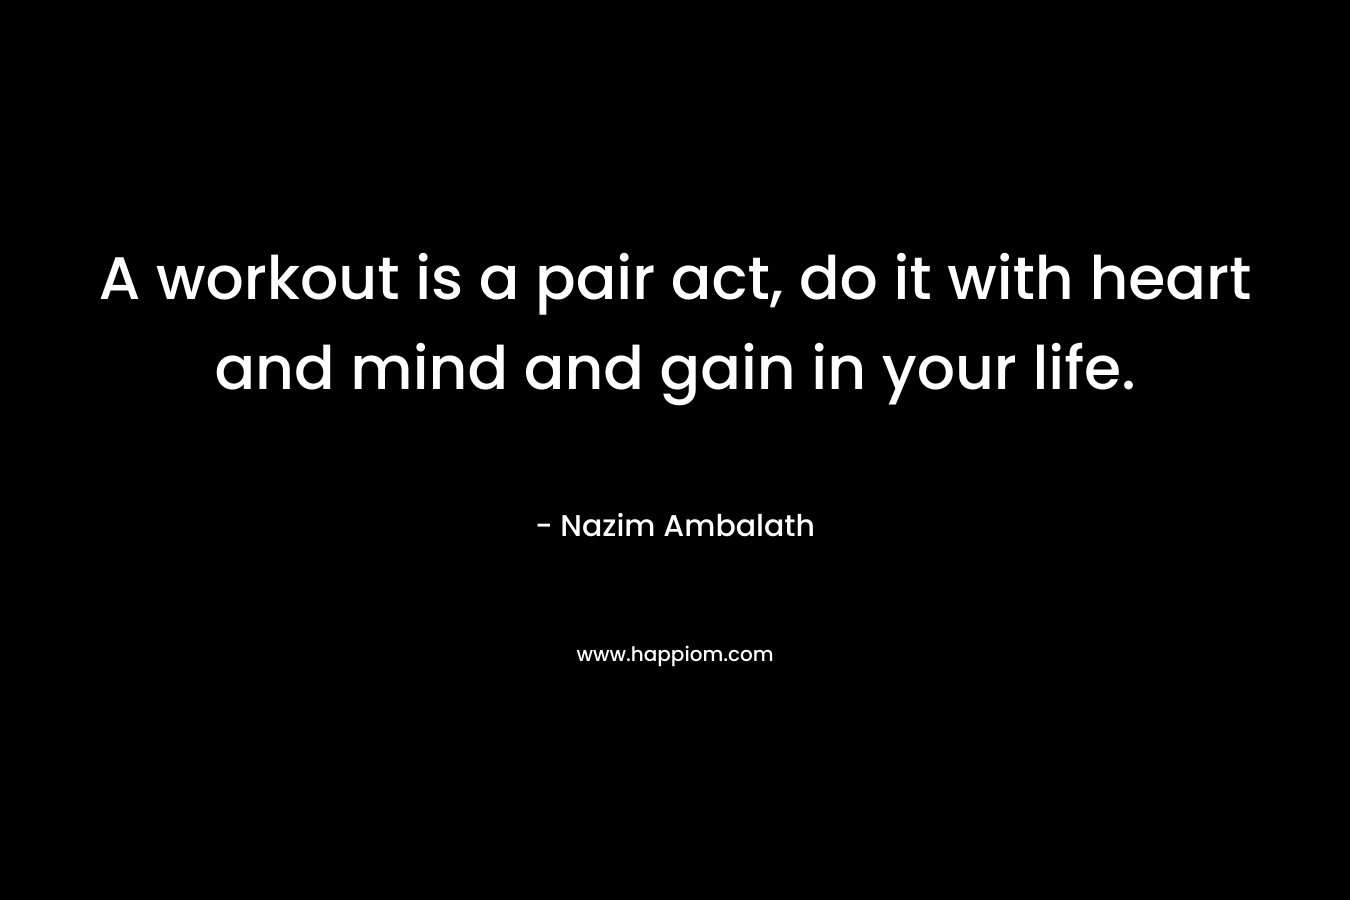 A workout is a pair act, do it with heart and mind and gain in your life. – Nazim Ambalath